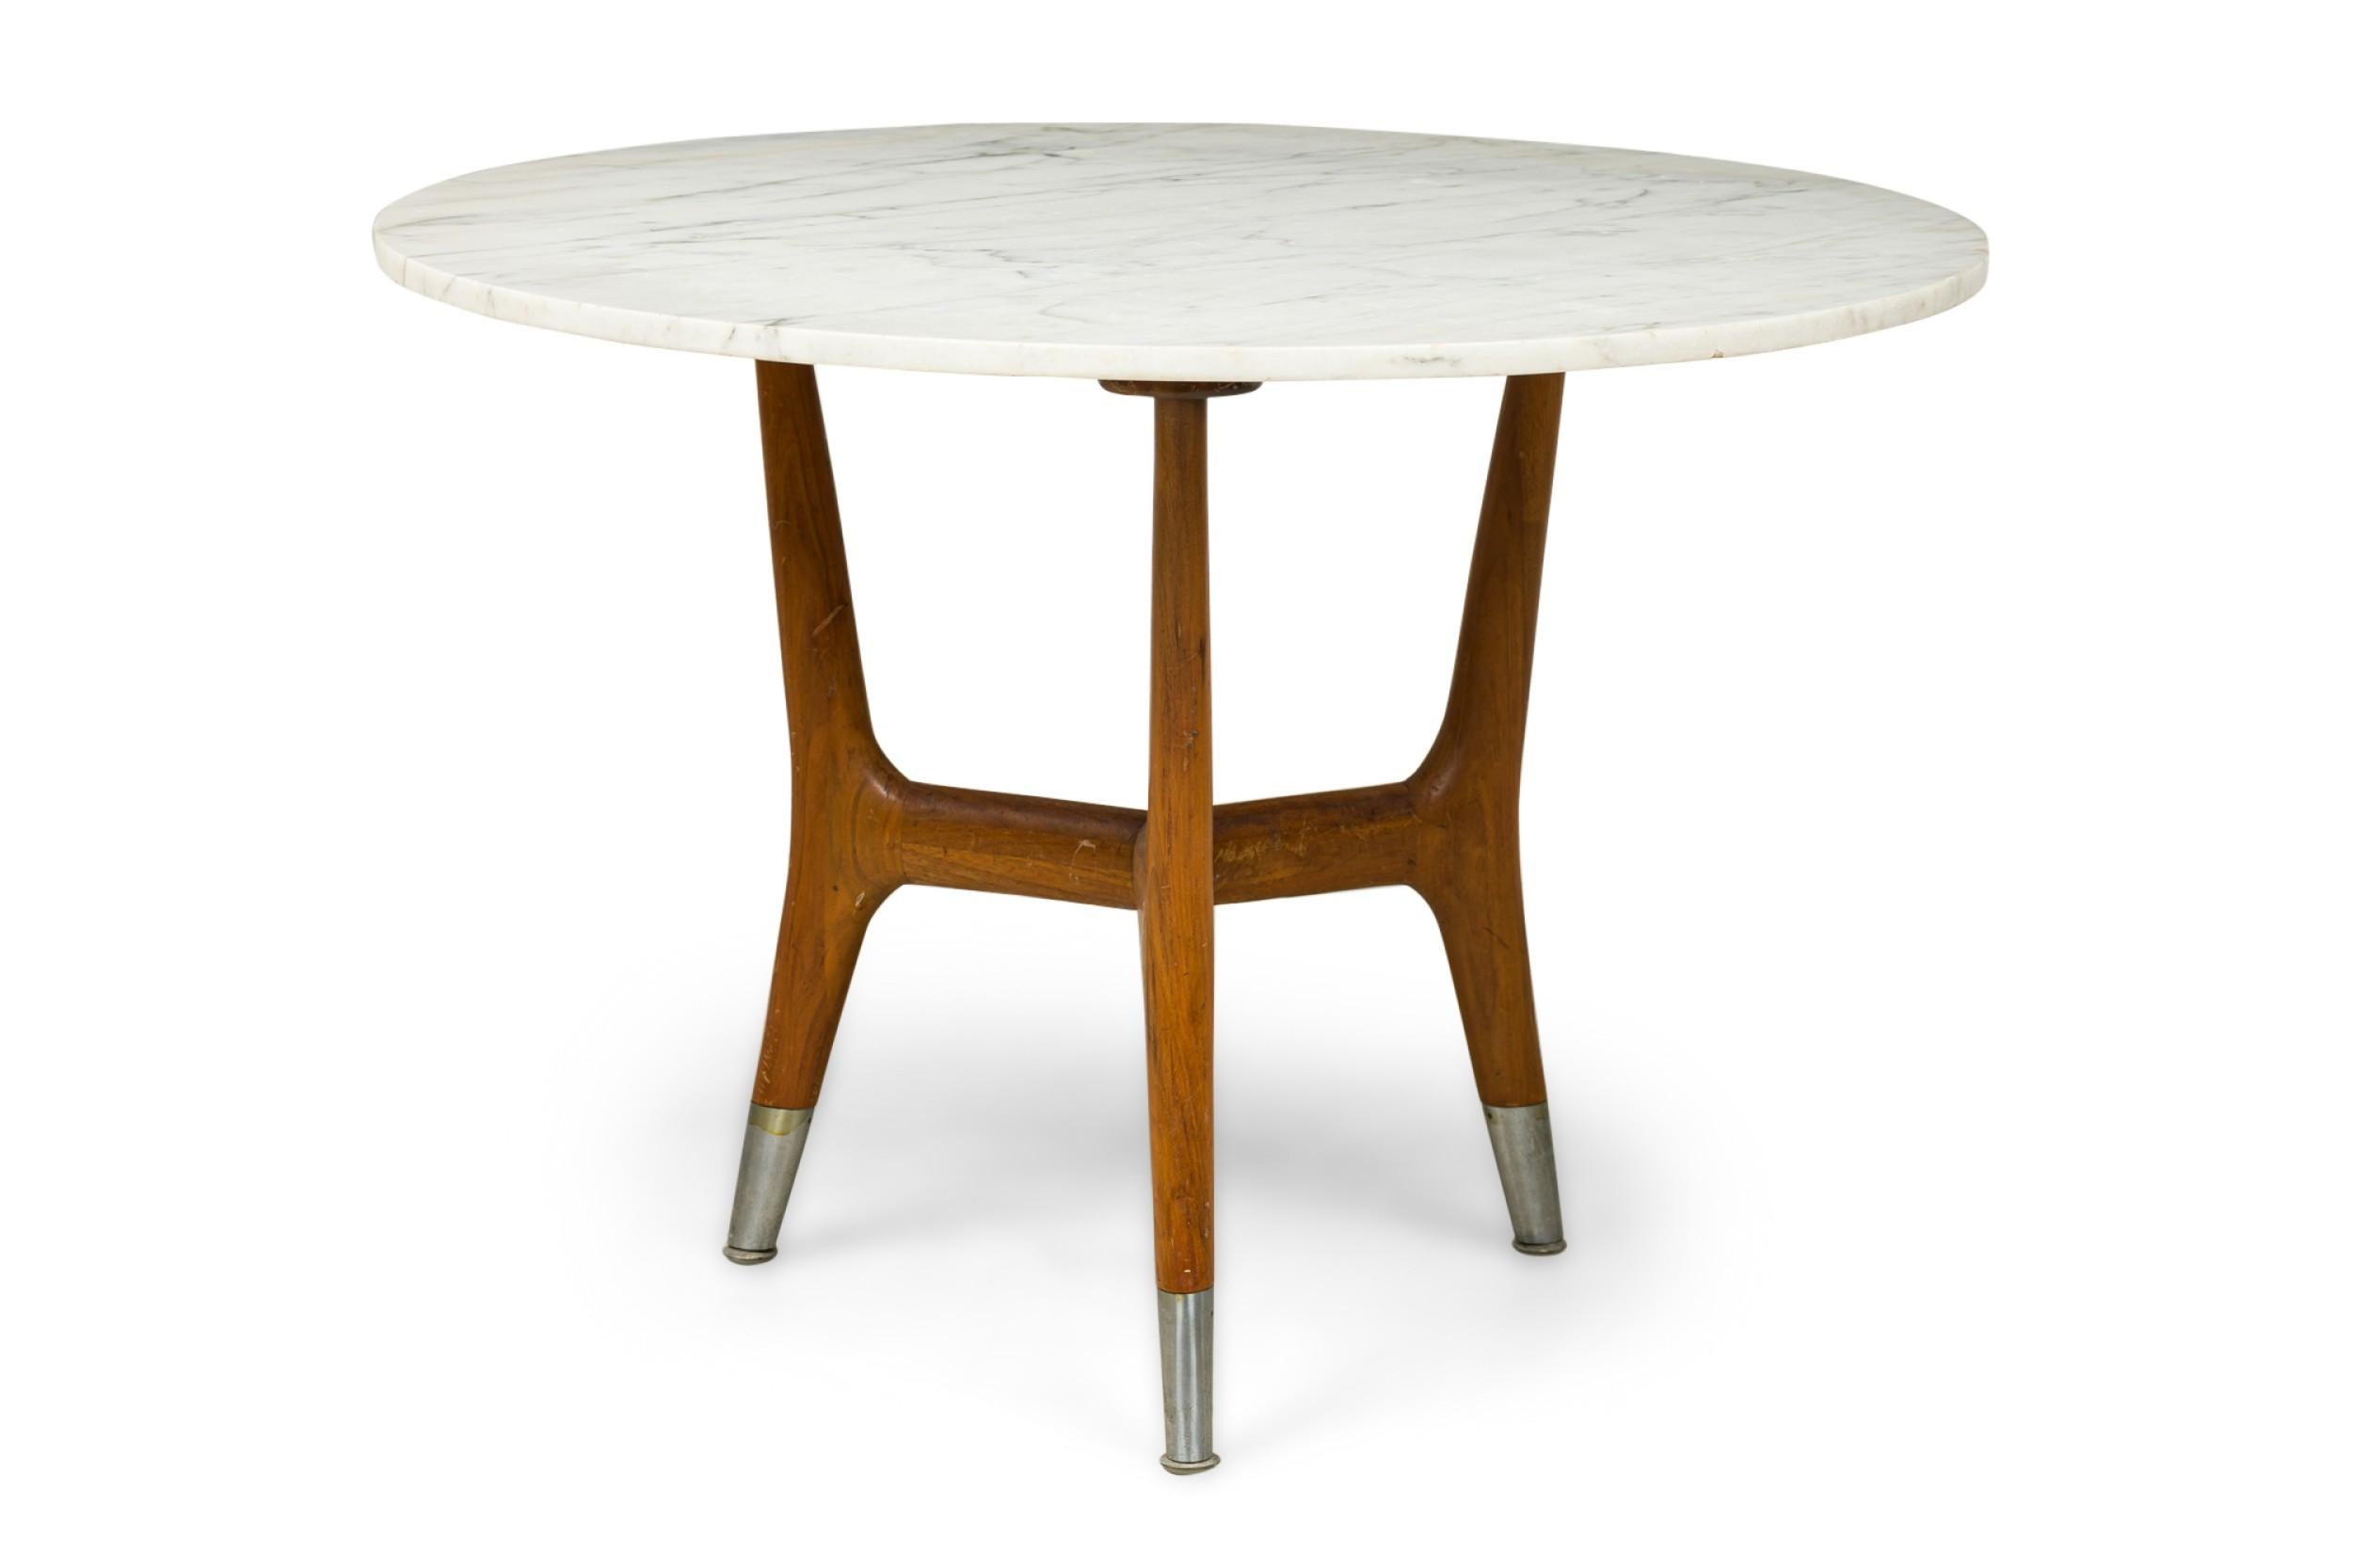 Italian Mid-Century walnut end table with 3 legs ending with gun metal sabot feet connected with a centered stretcher supporting a round white marble top (att: DASSI)
